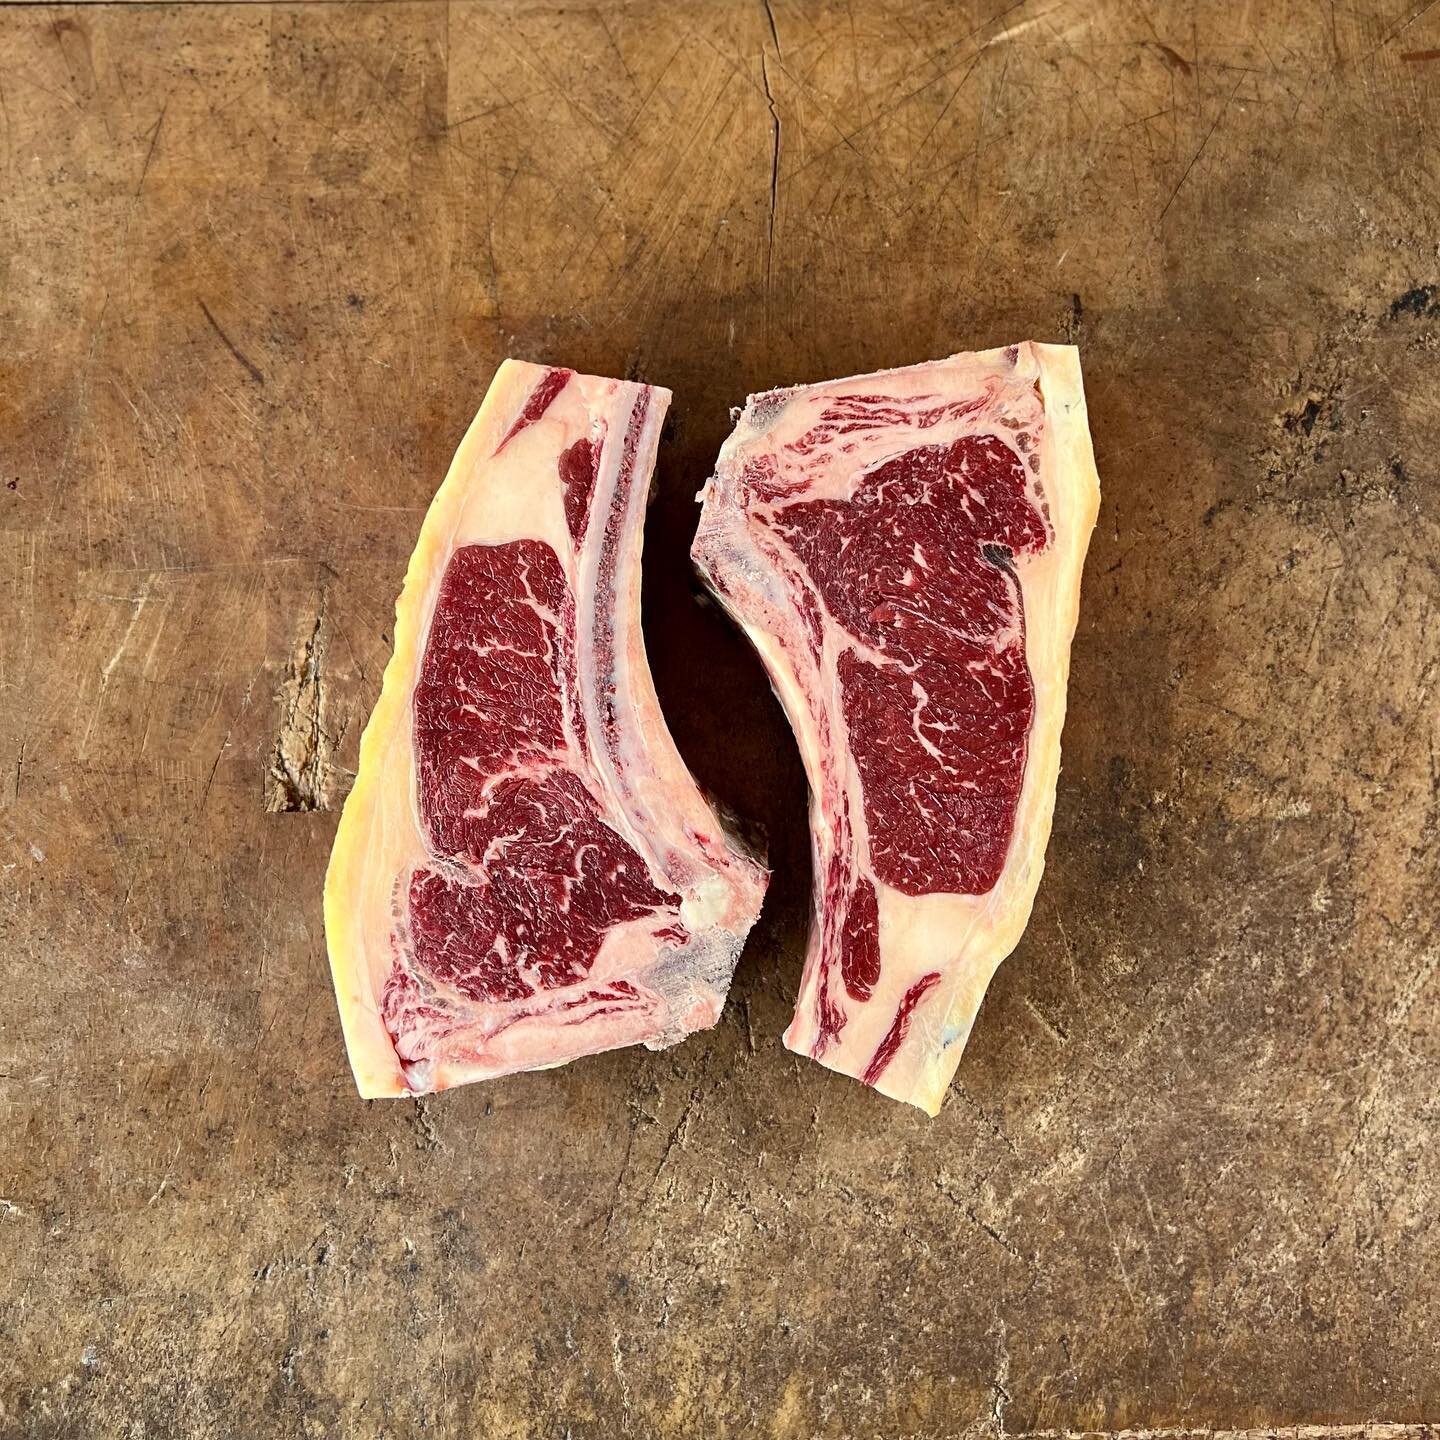 @txuleta1882 six year old retired Dairy Shorthorn bistecca, 35 days dry aged. These two and few more off to @chefcristianopata @pinos_vino_e_cucina this week.